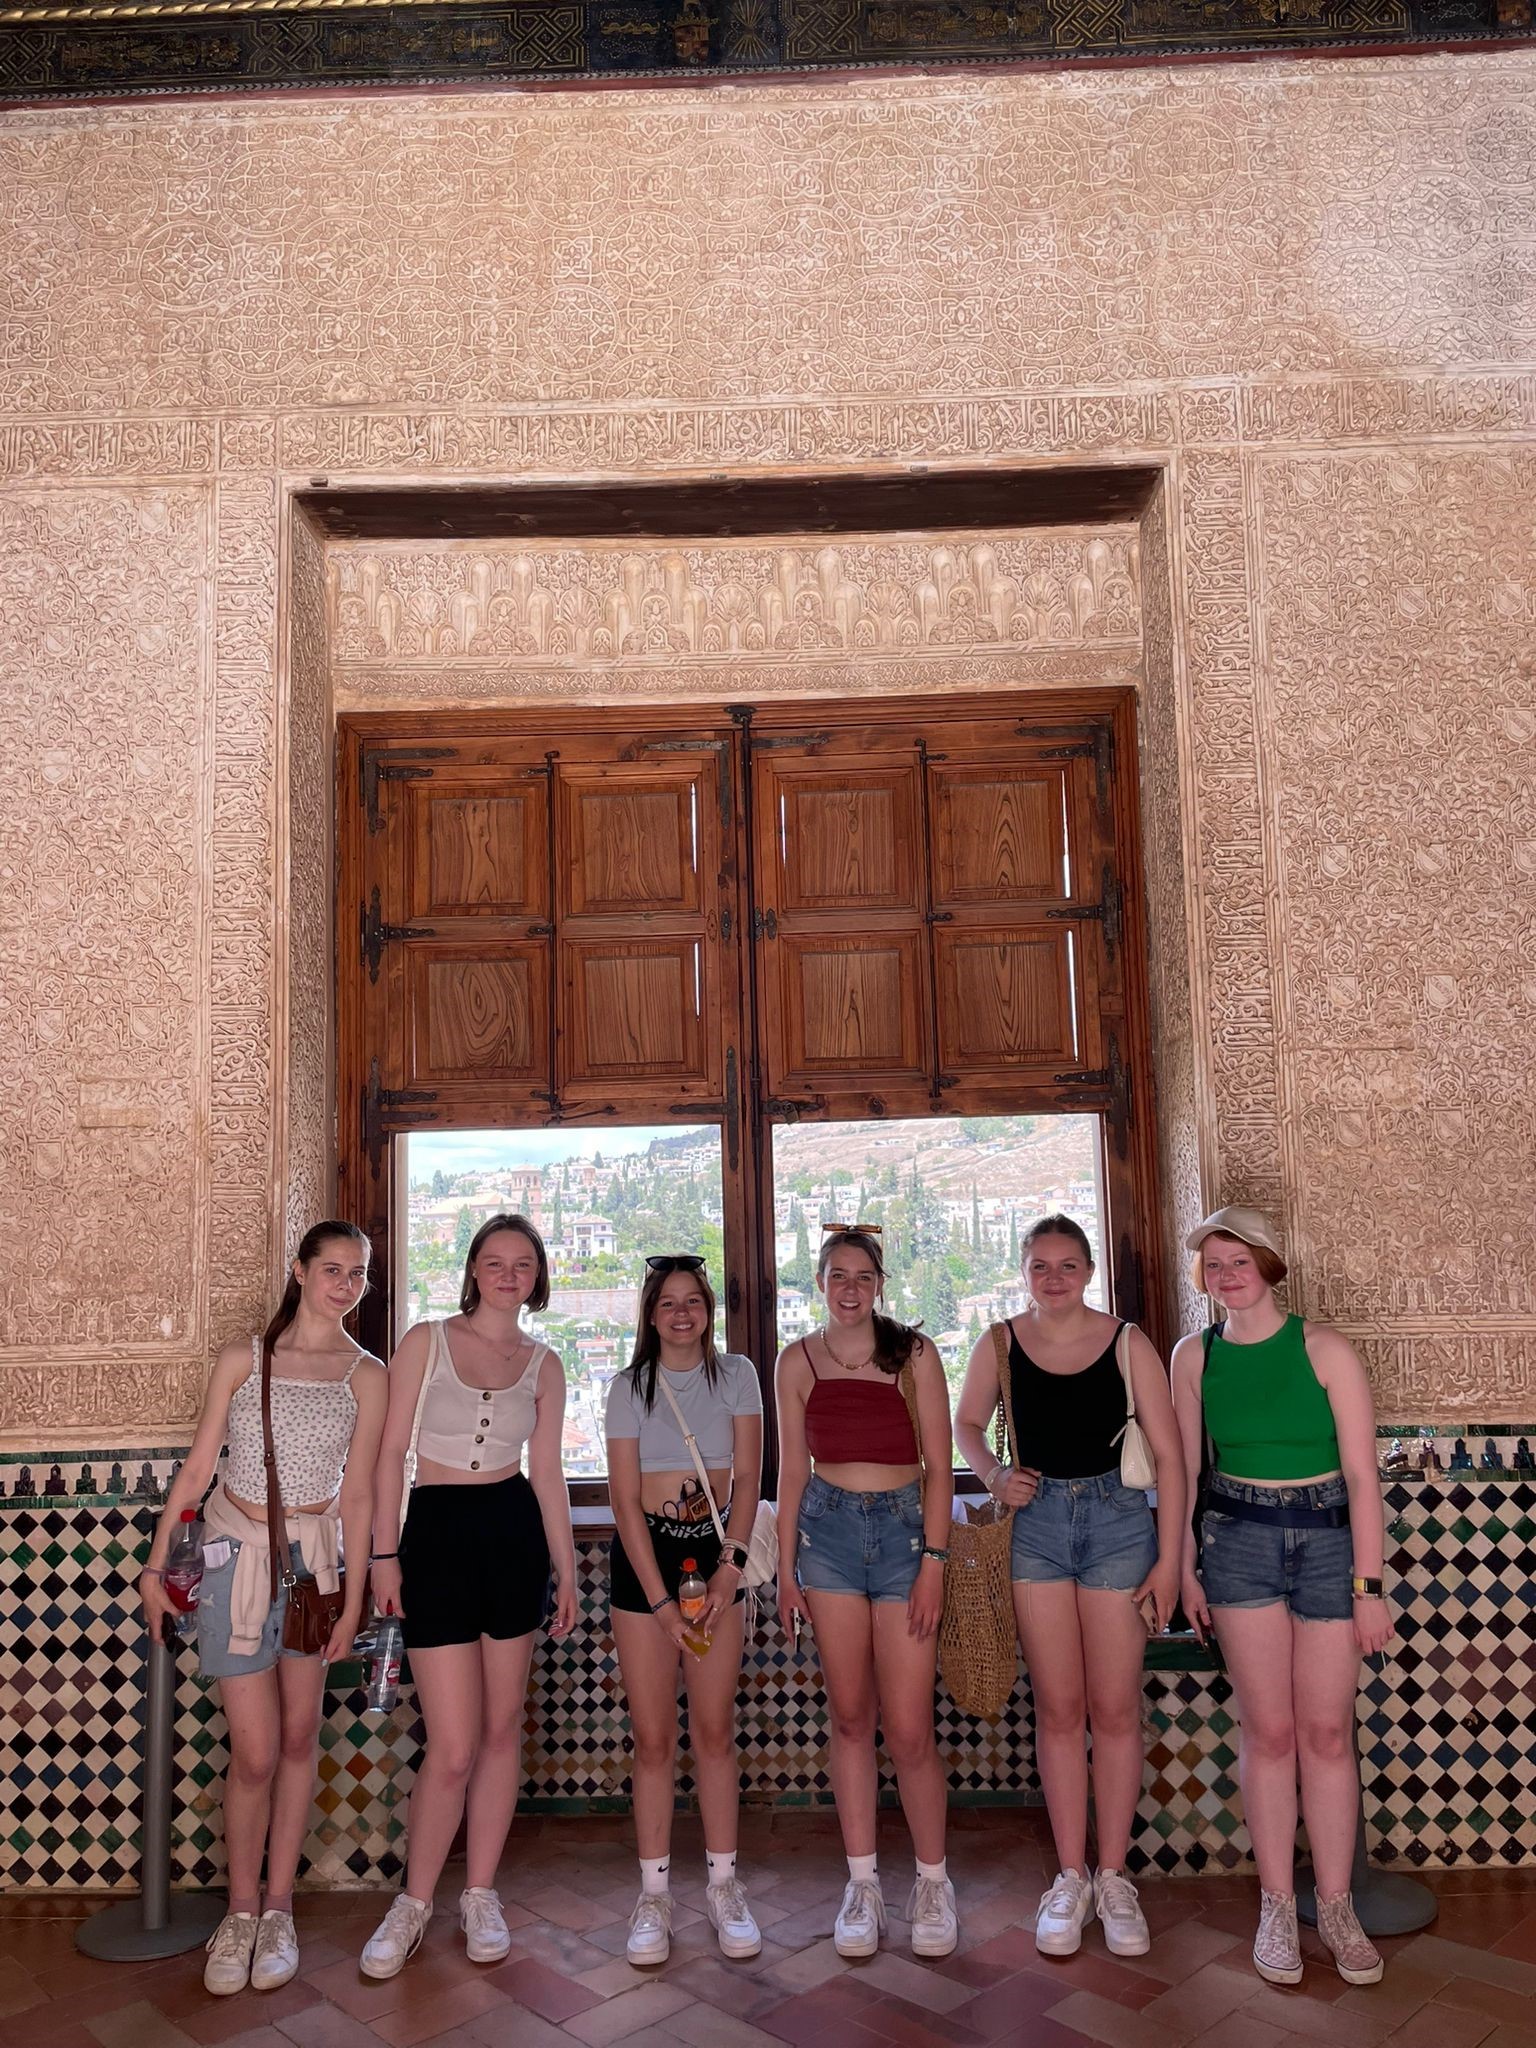 Agoed High School students with the Alhambra Palace in the background.